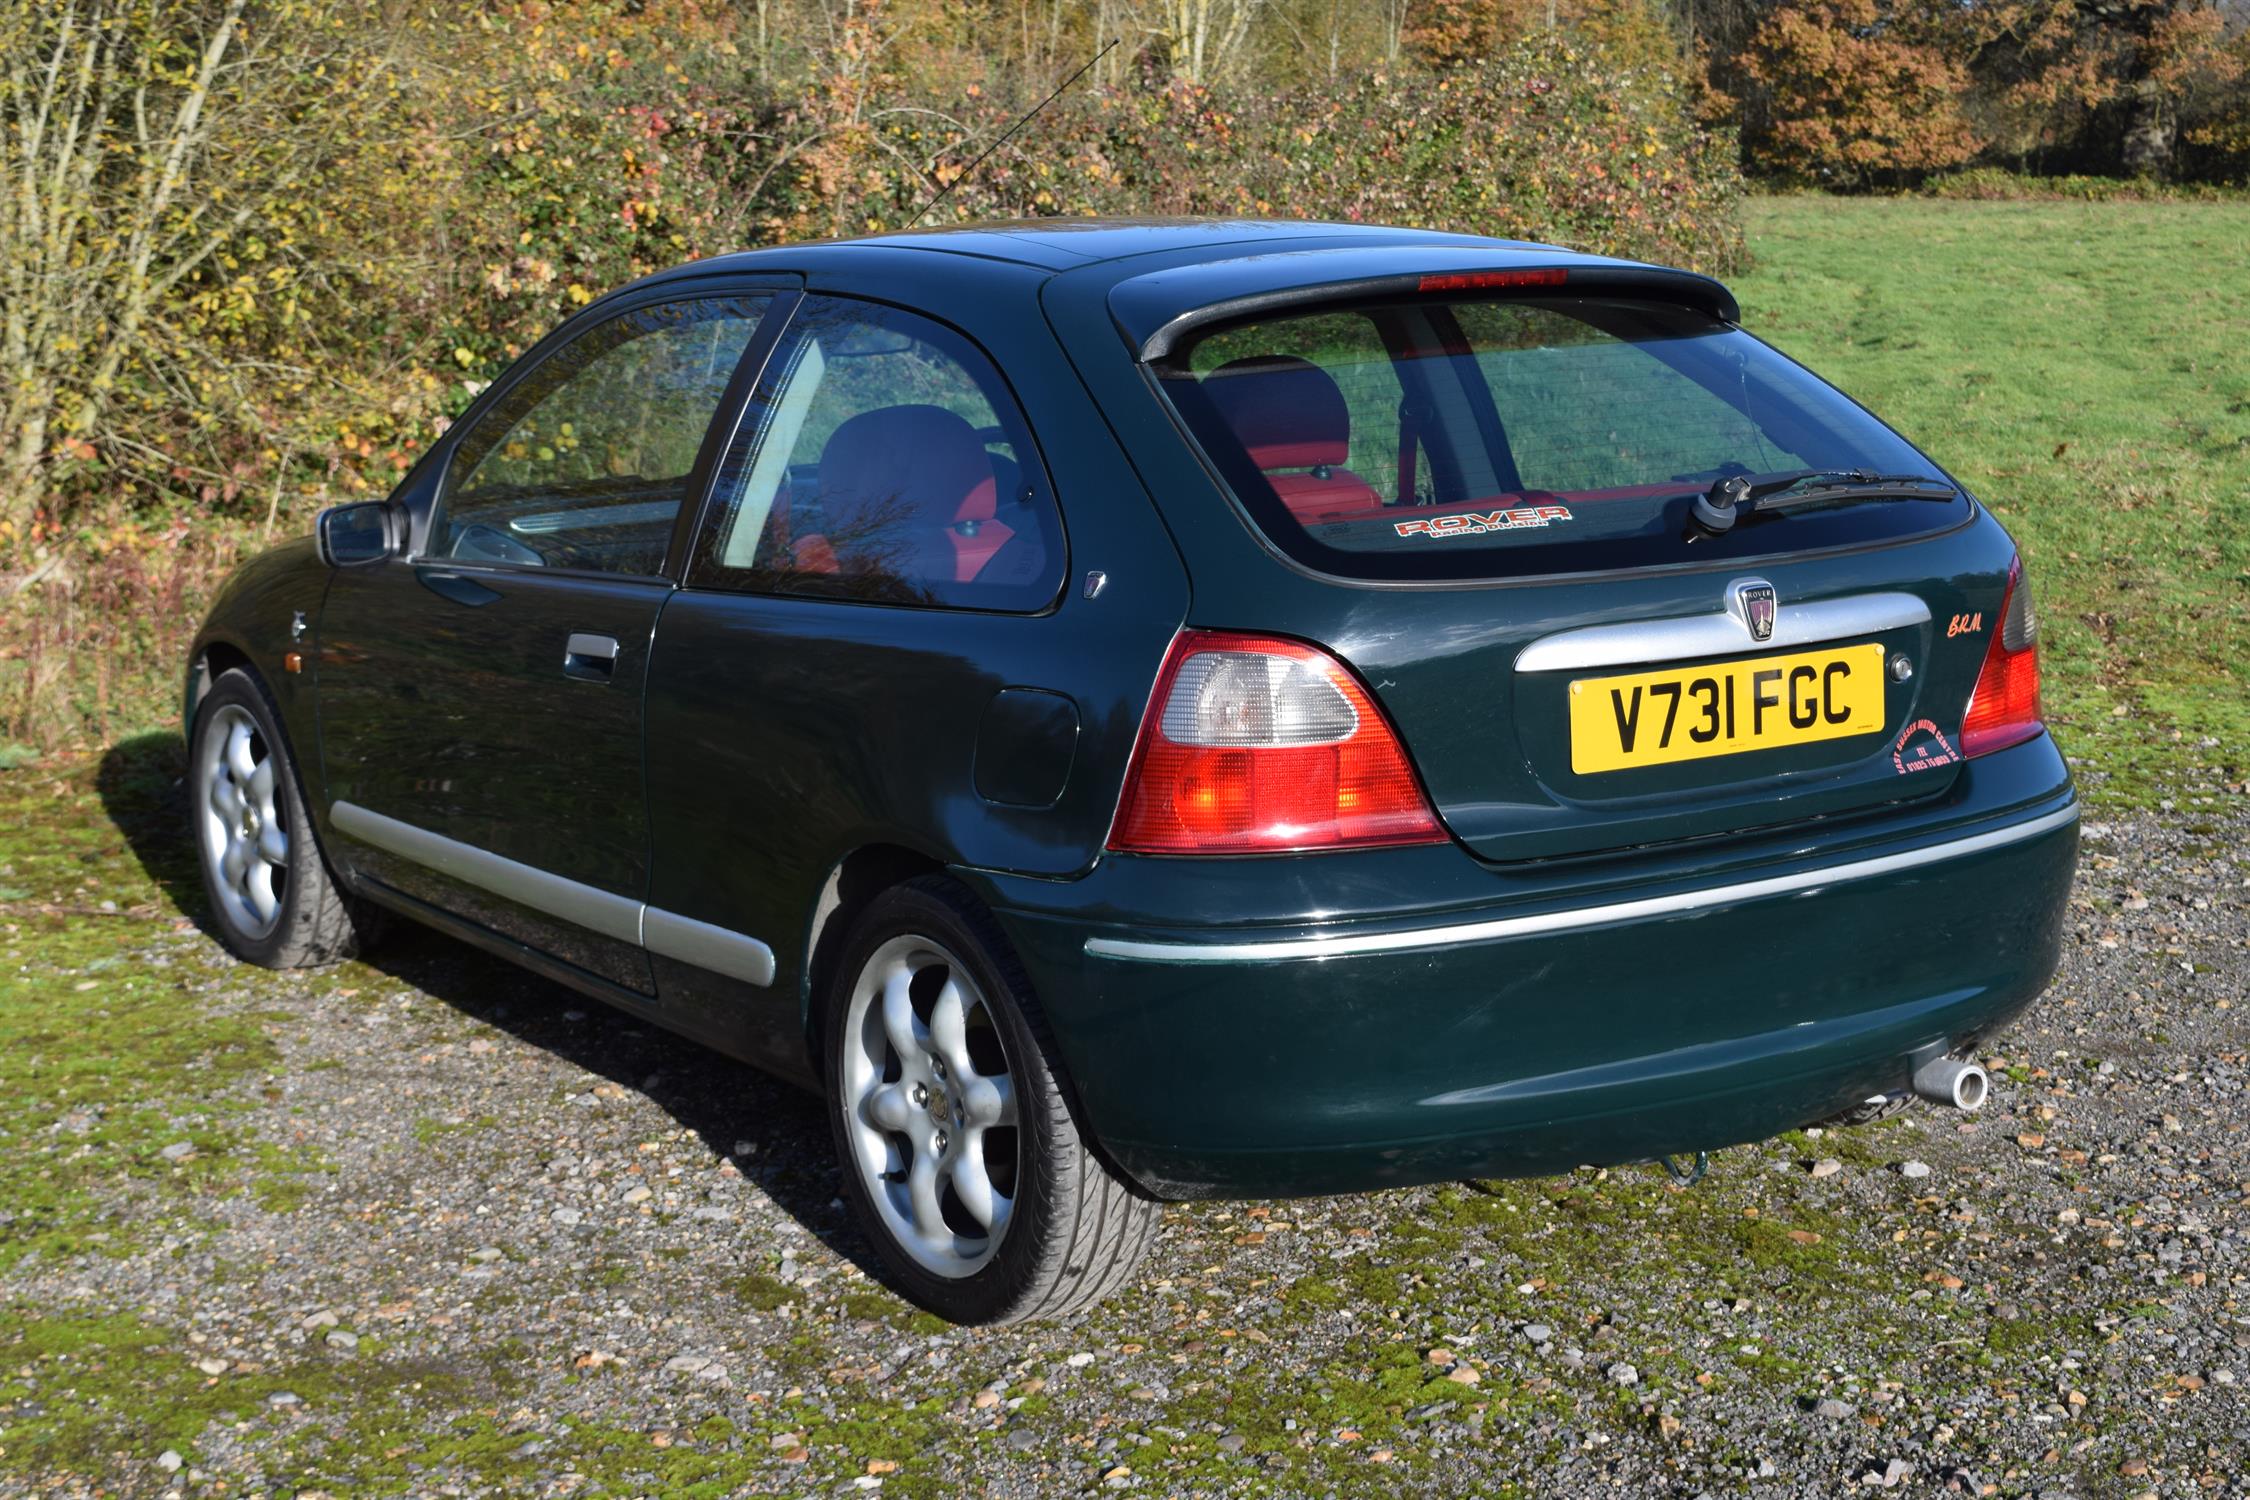 1999 Rover 200 LE BRM - Low mileage example - Mot’d until September 2022 - ‘Brooklands’ green - Image 2 of 19